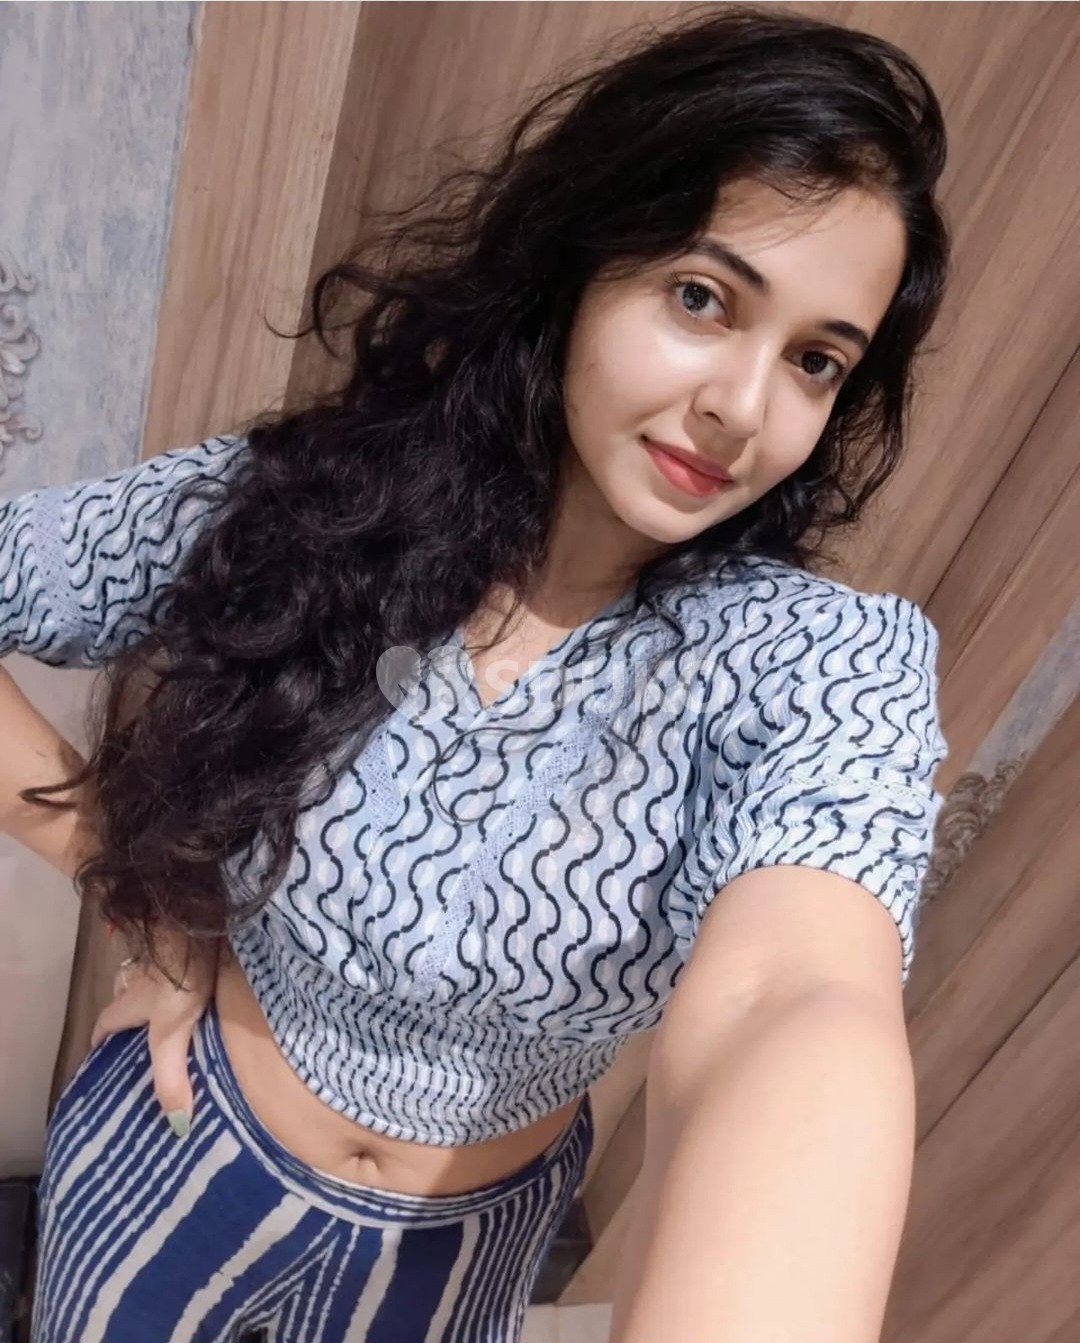 Ooty ✅ 24x7 AFFORDABLE CHEAPEST RATE SAFE CALL GIRL SERVICE AVAILABLE OUTCALL AVAILABLE...,